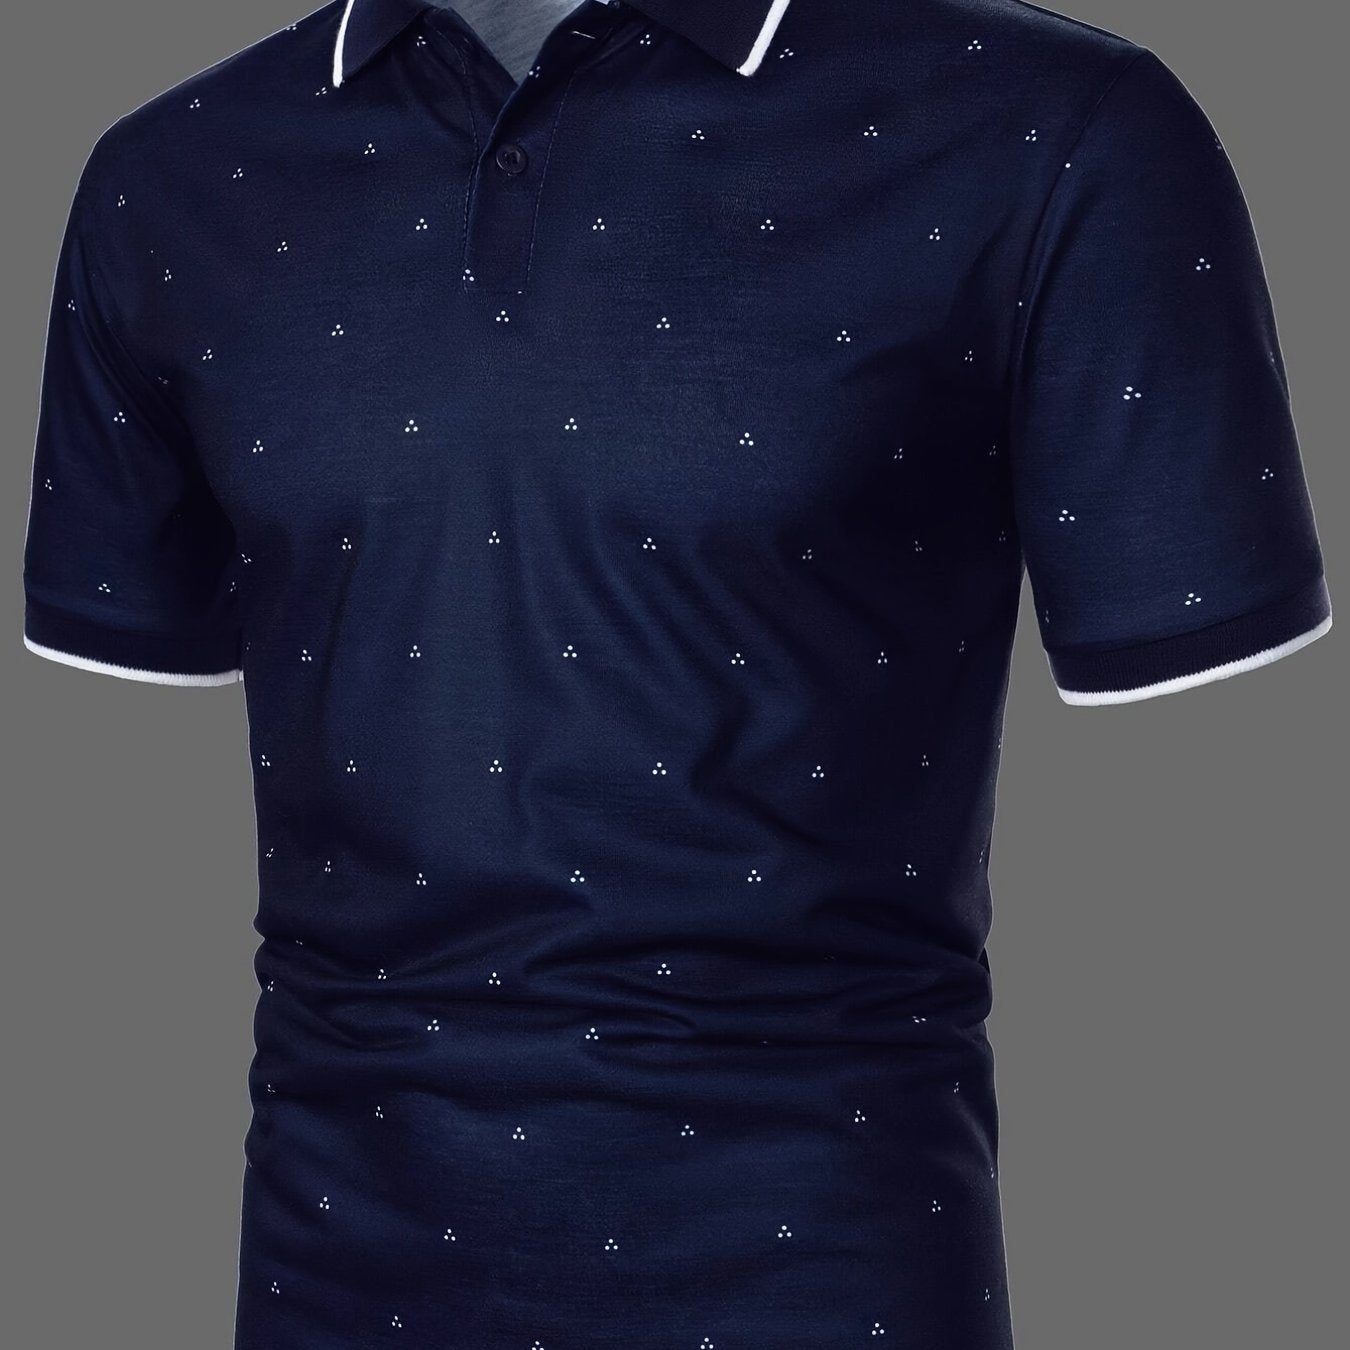 「lovevop」Men's Polo Shirts, Casual Navy Blue Slim Fit Lapel Button Up Polo Shirt